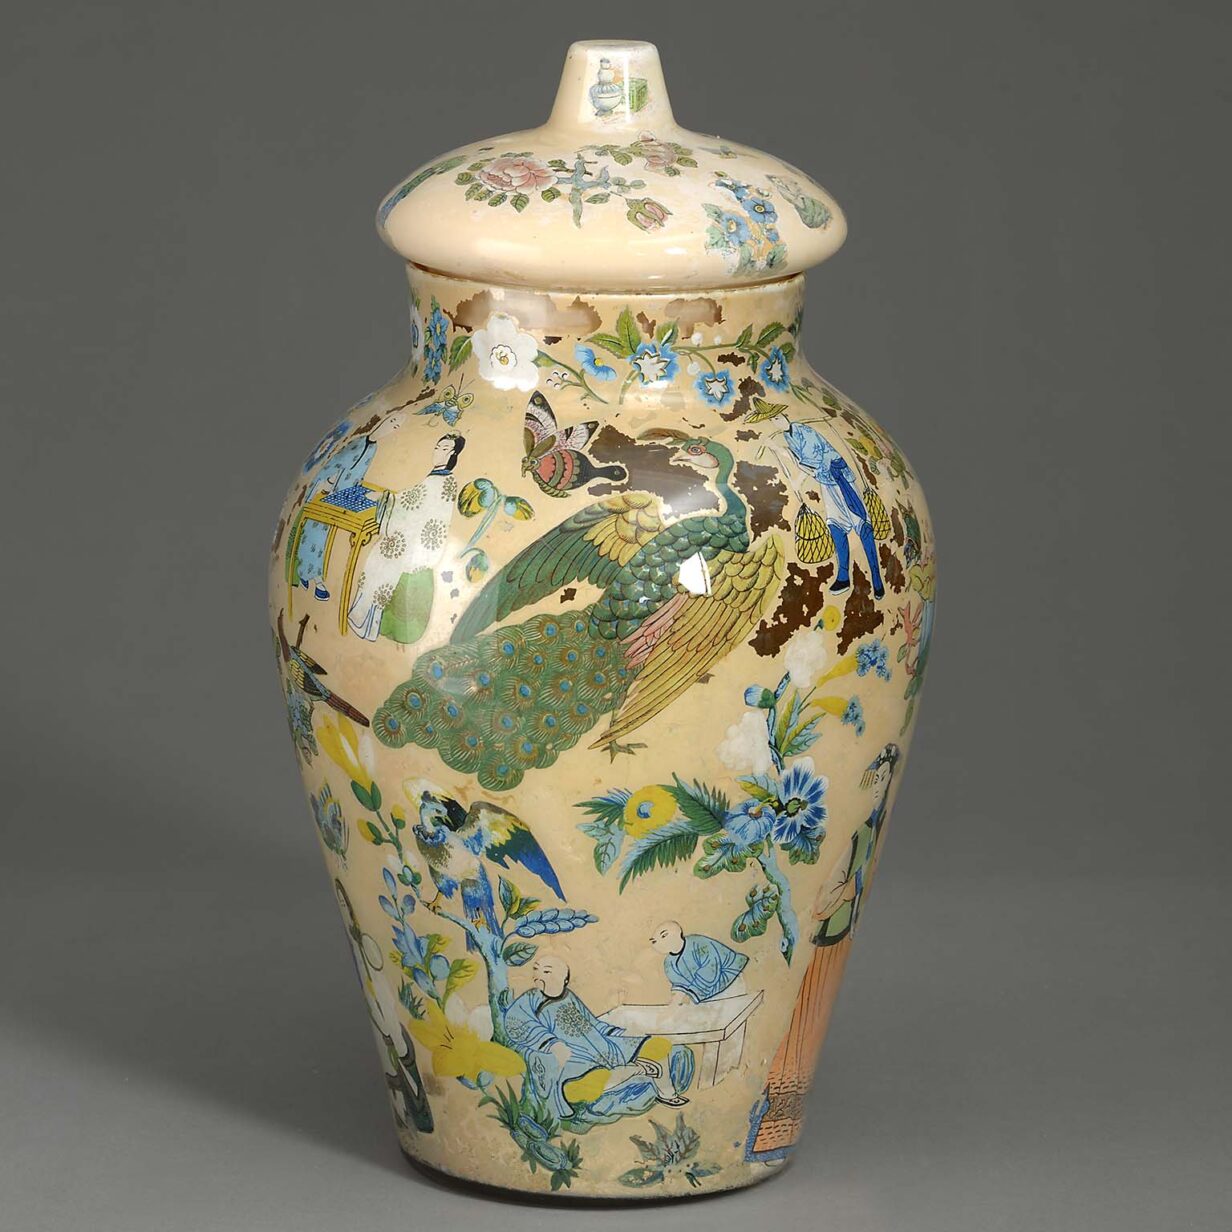 19th century decalcomania vase and cover